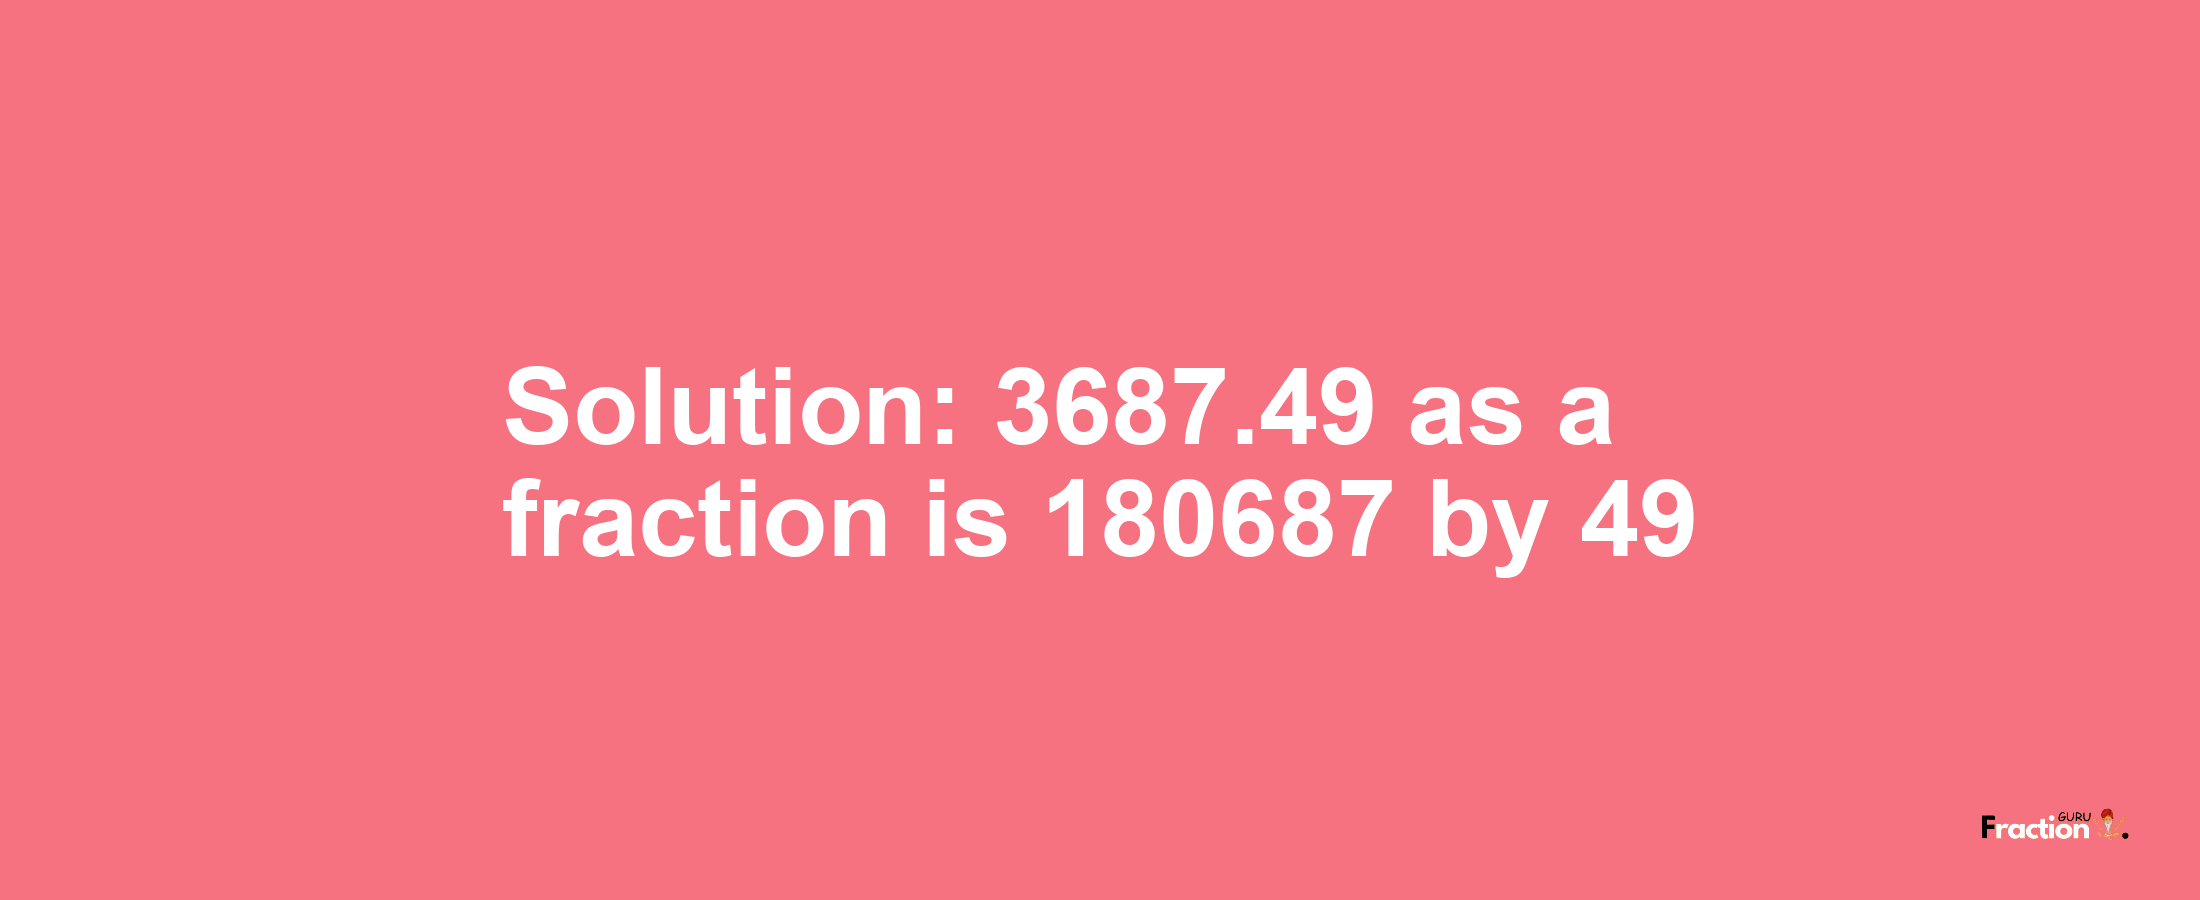 Solution:3687.49 as a fraction is 180687/49